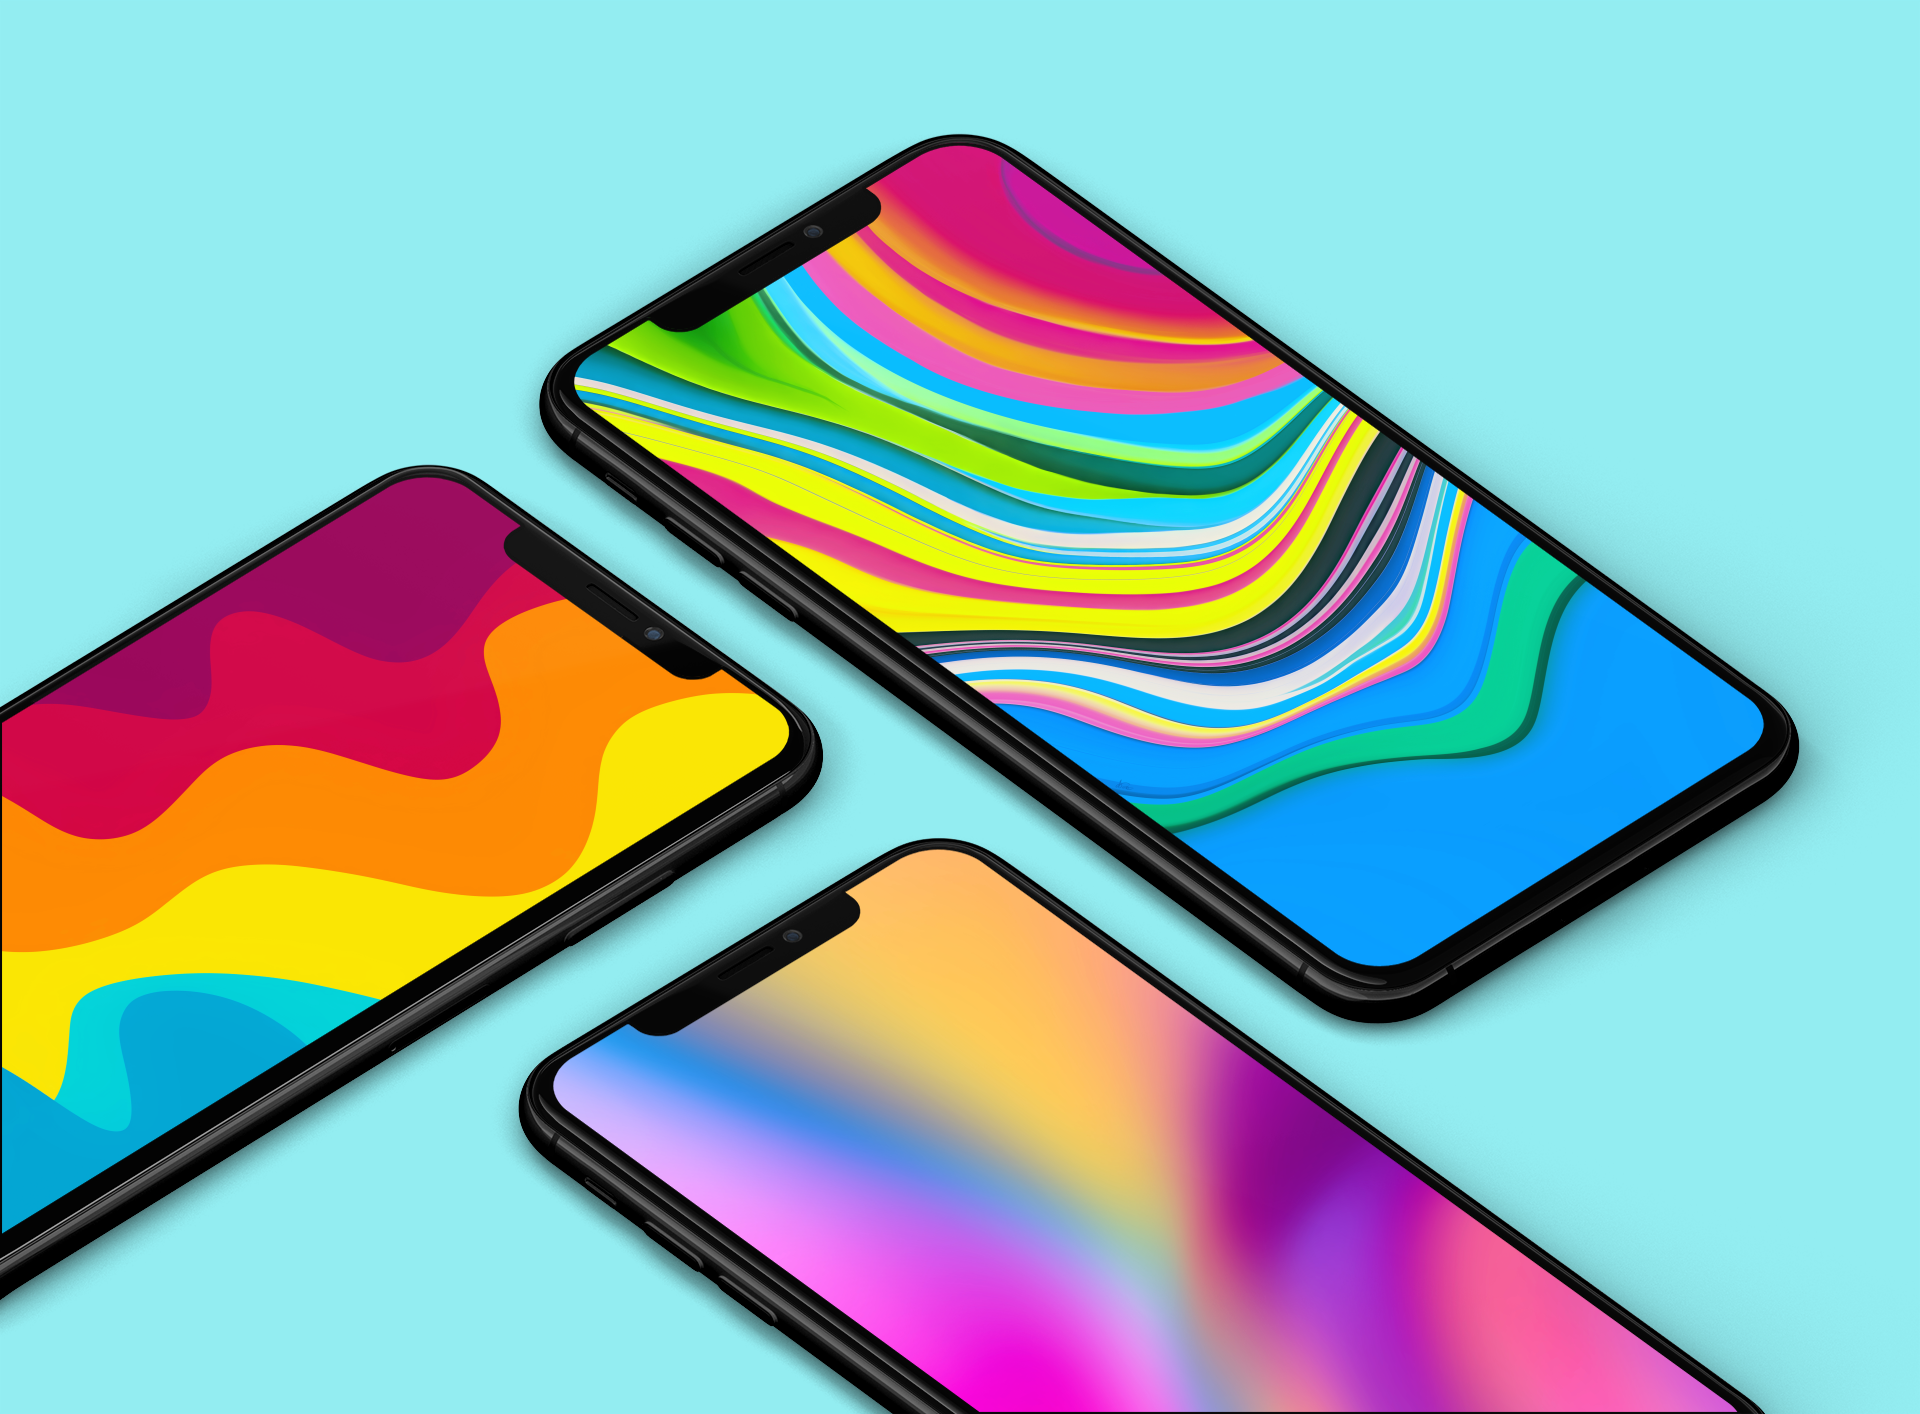 HOT SUMMER wallpaper pack for iPhone